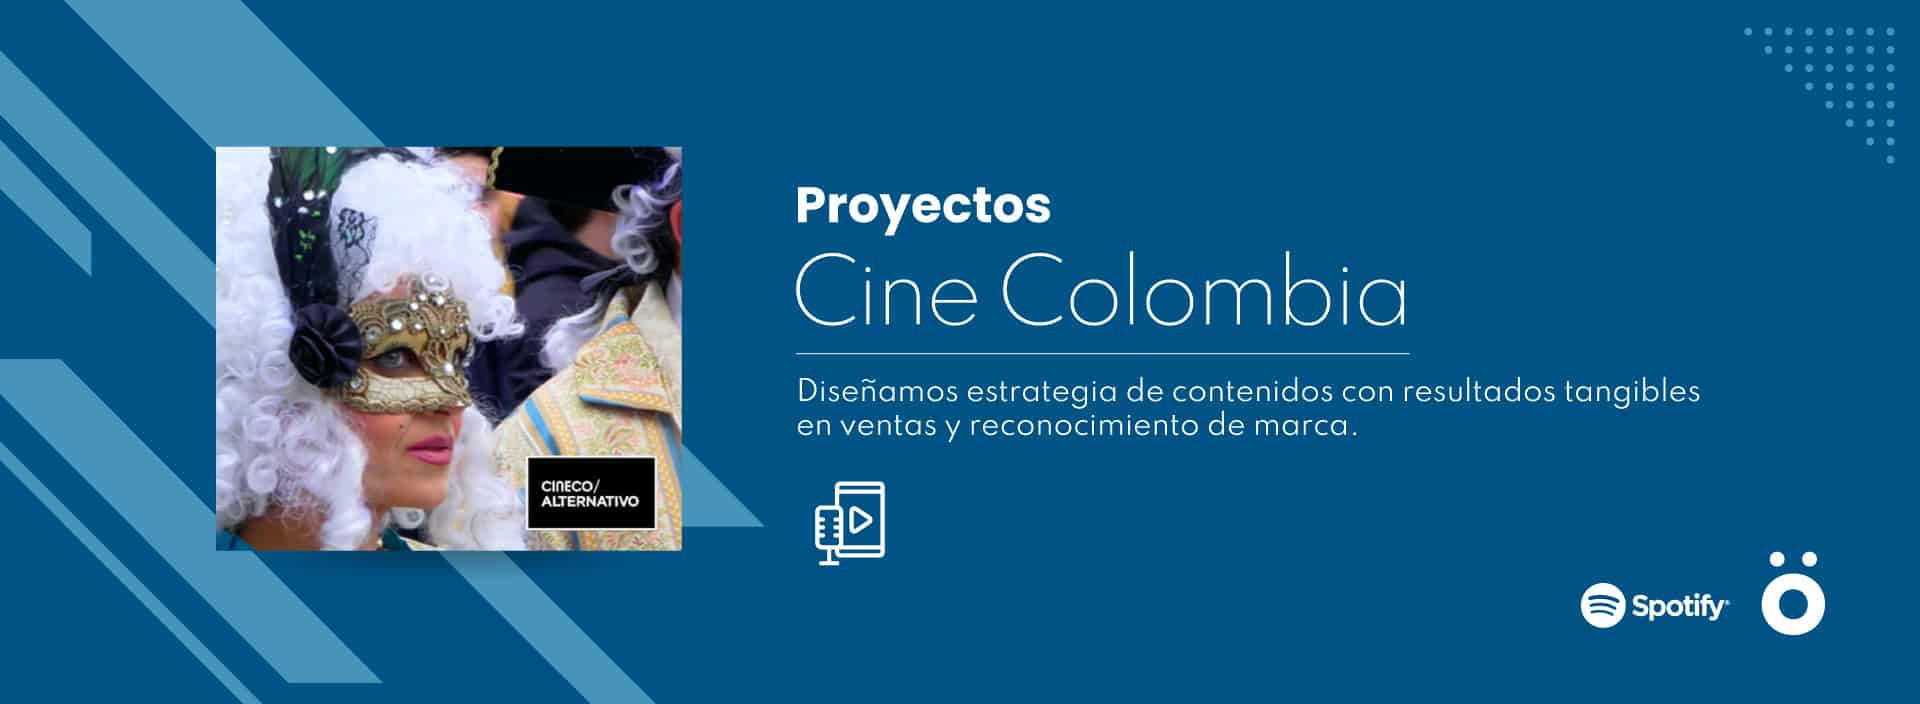 CINECOLOMBIA